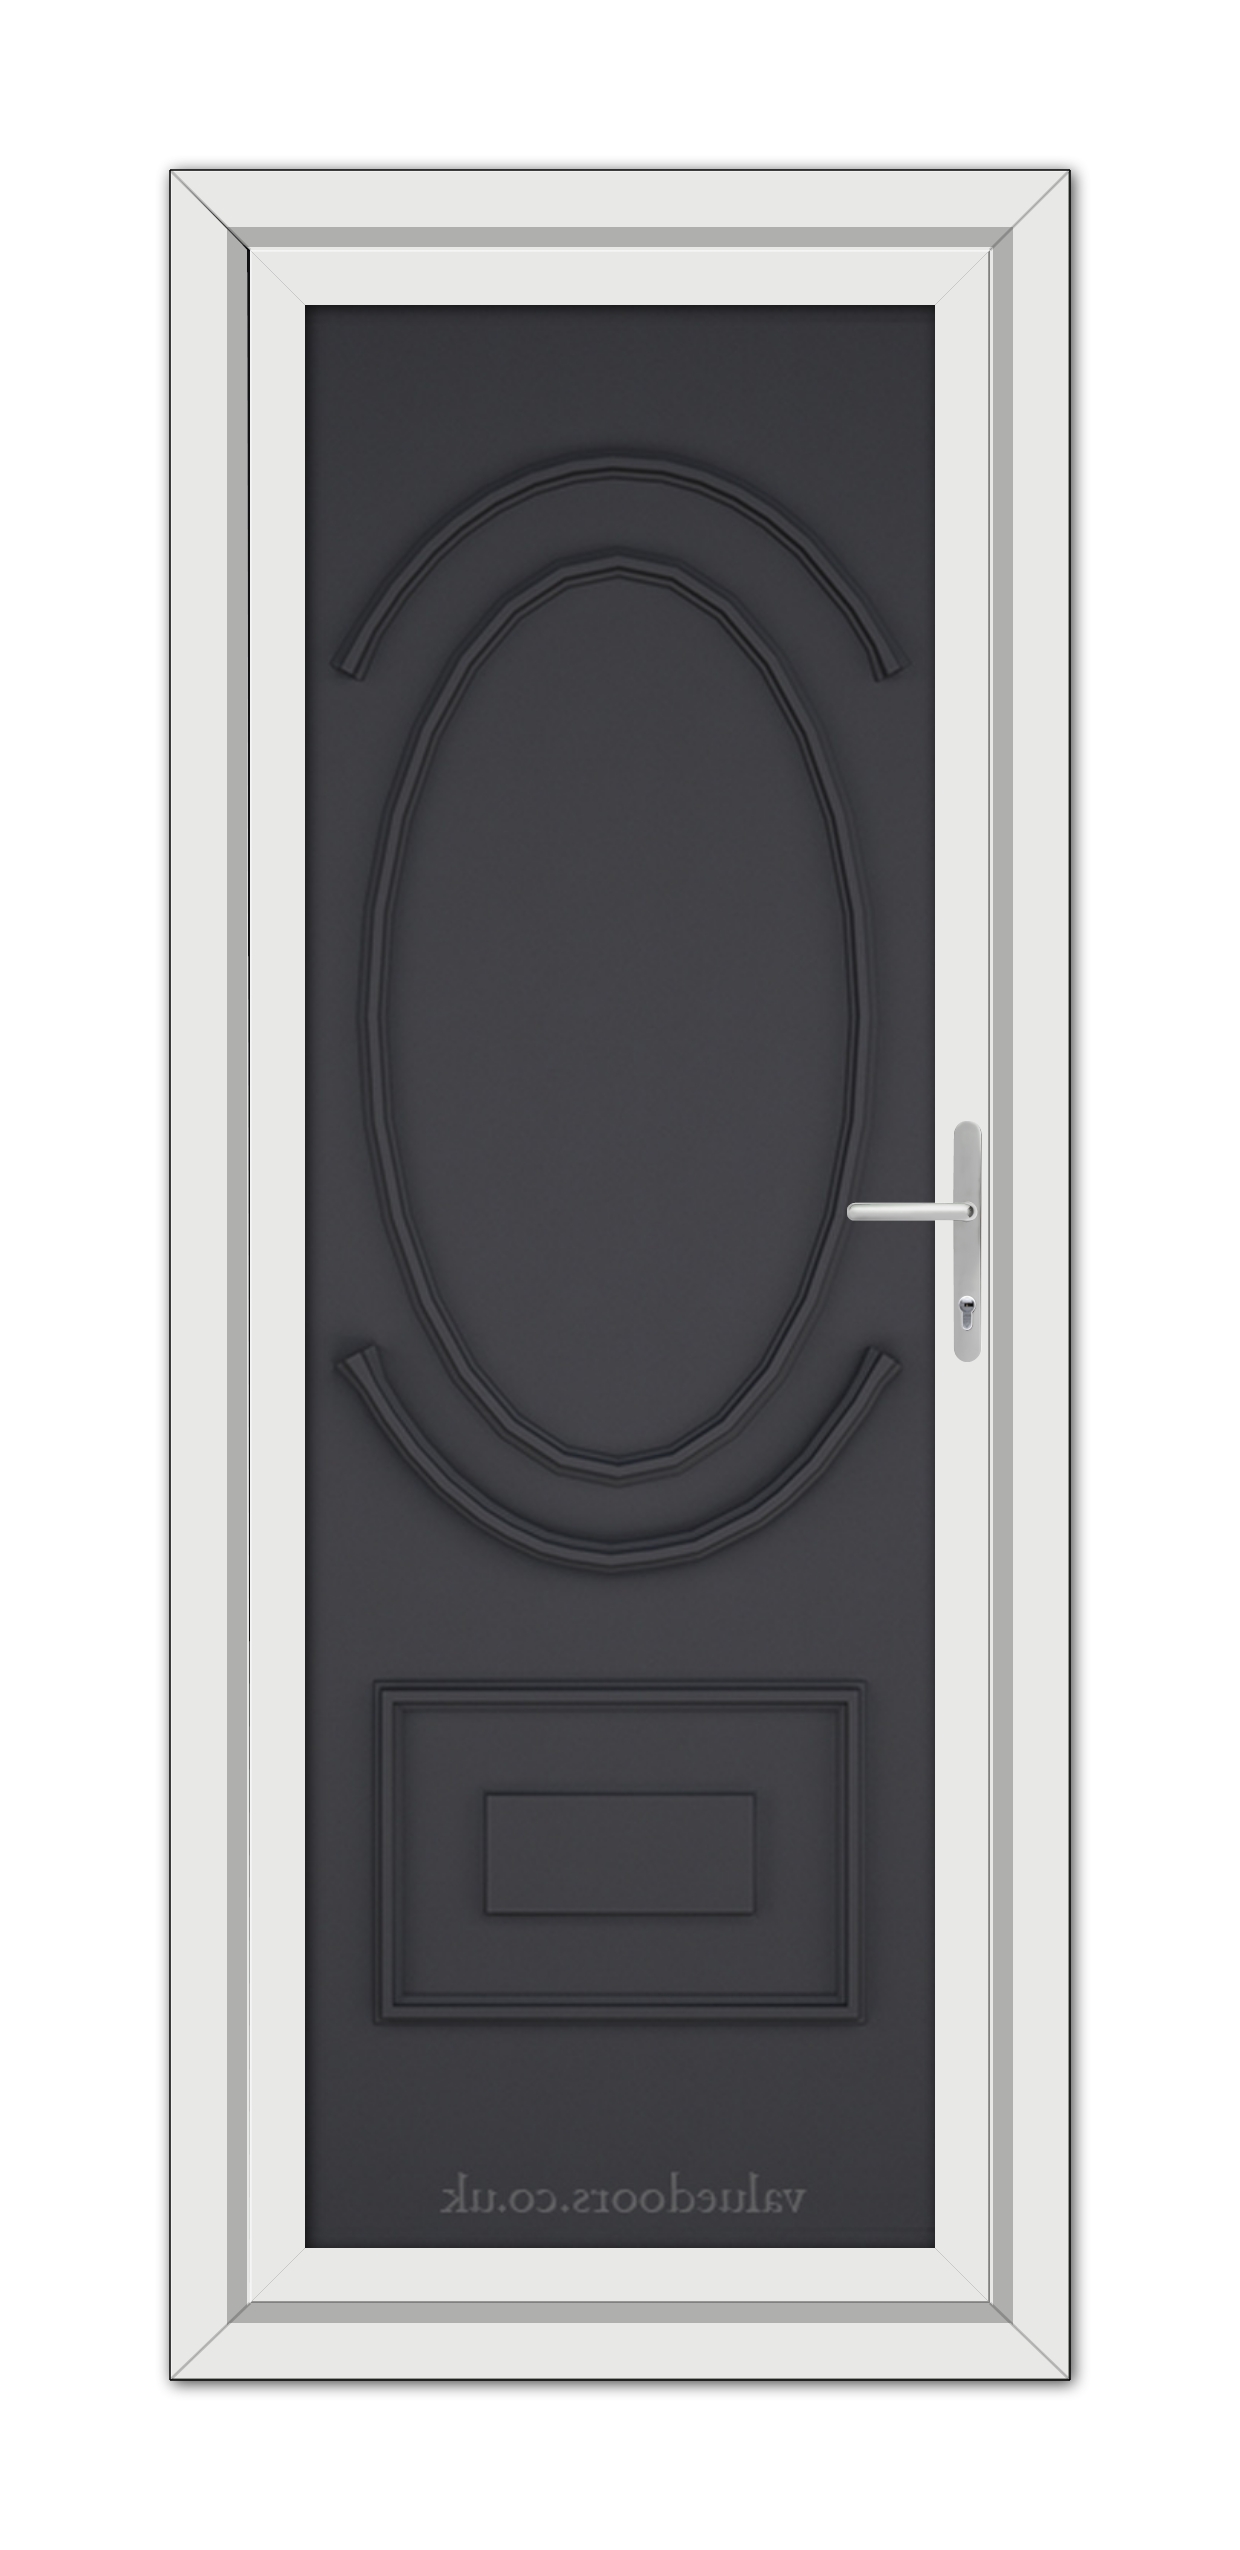 A modern Grey Richmond Solid uPVC Door with an oval window and a rectangular panel, set in a white frame with a silver handle on the right.